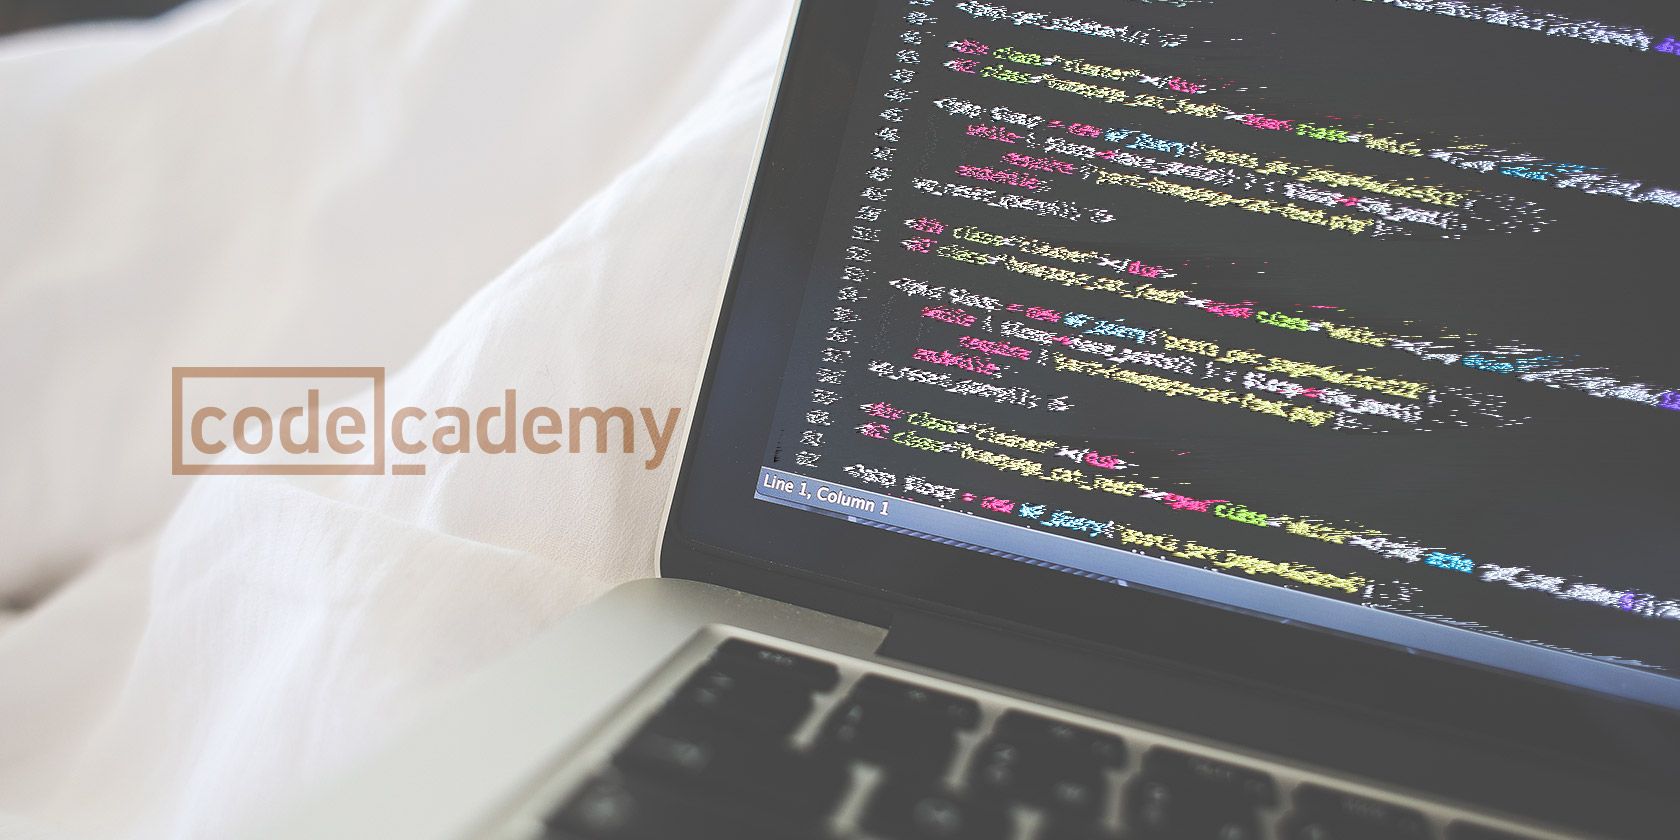 codeacademy-donts